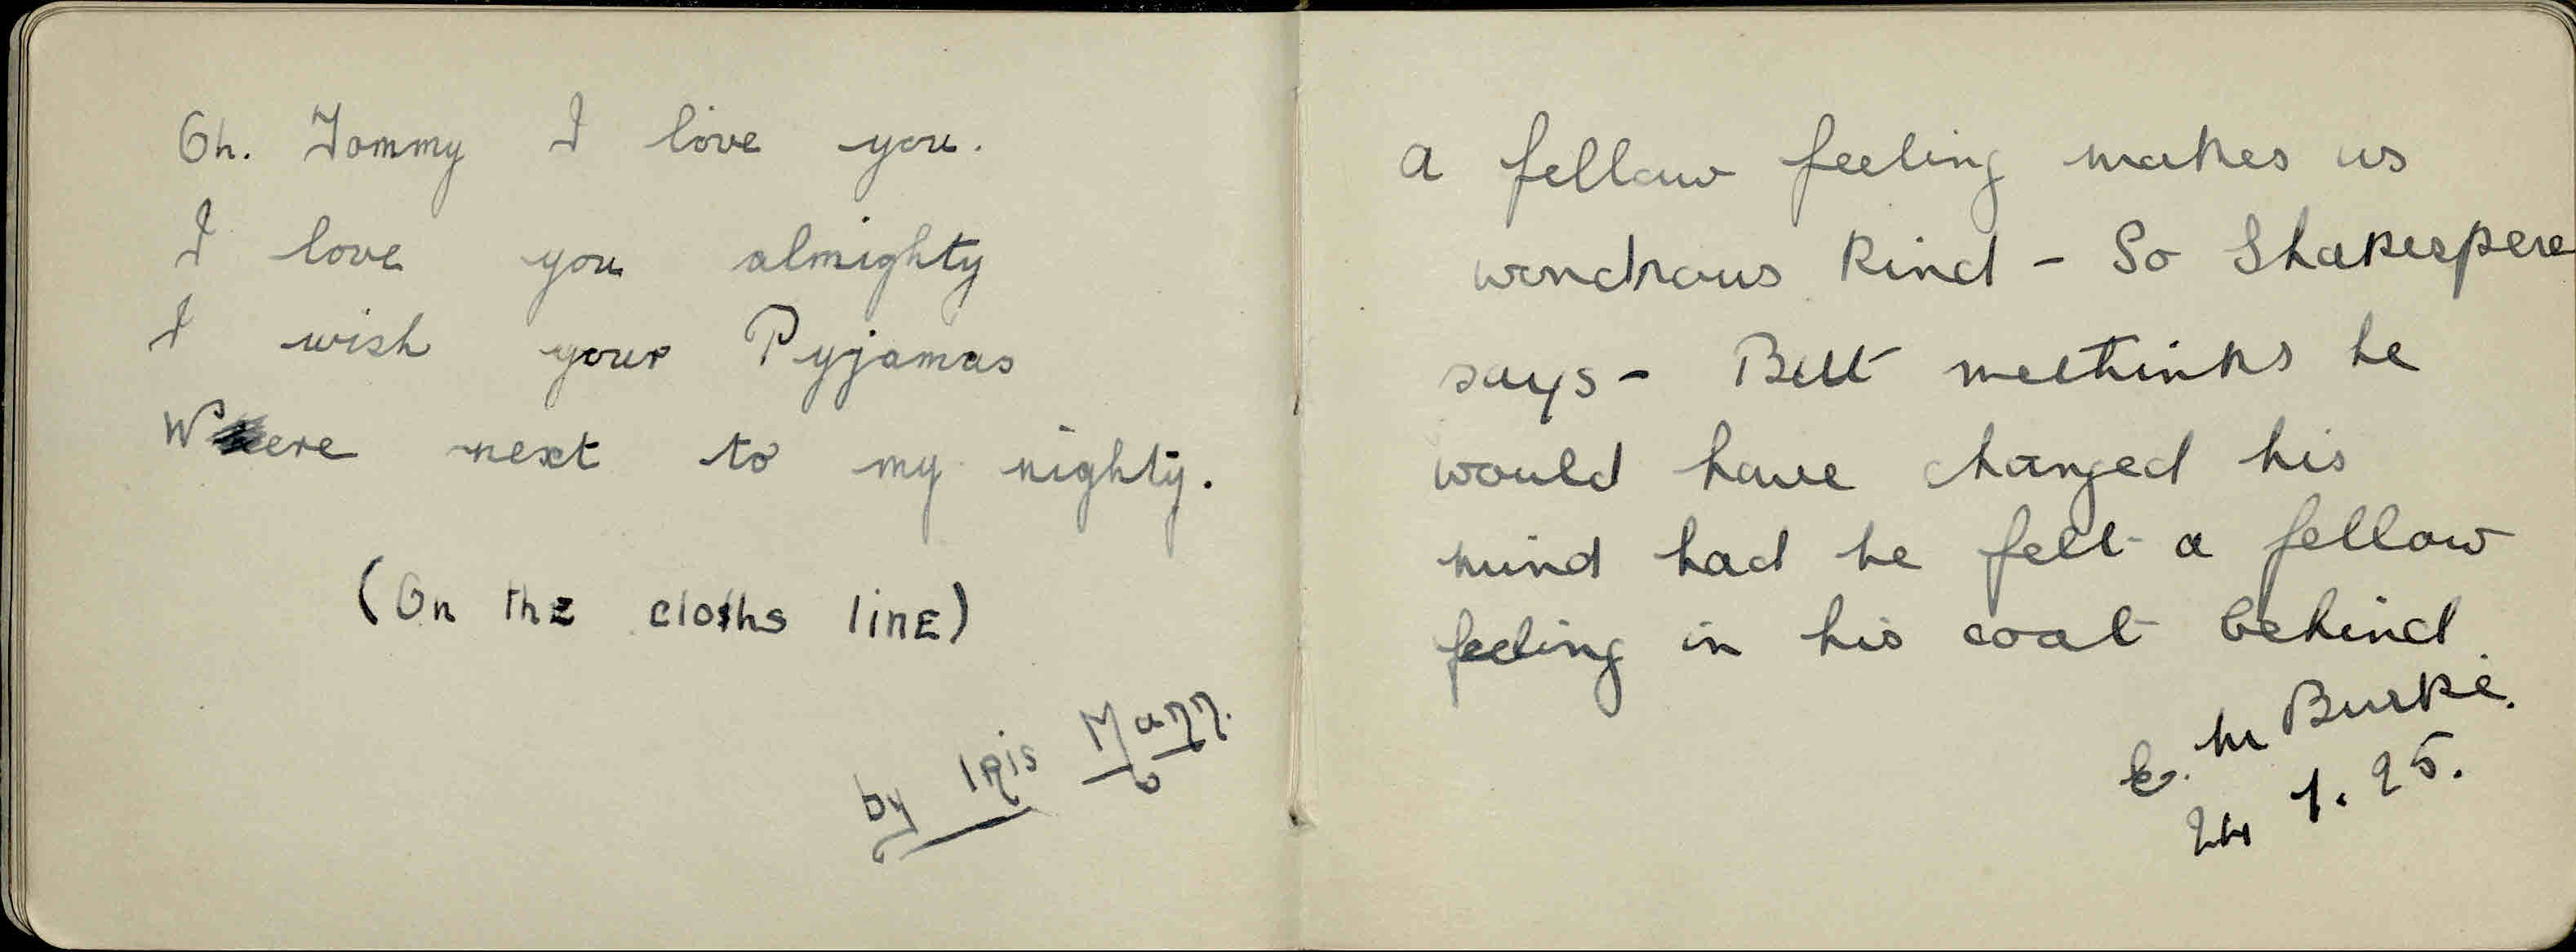 Extract from autograph book